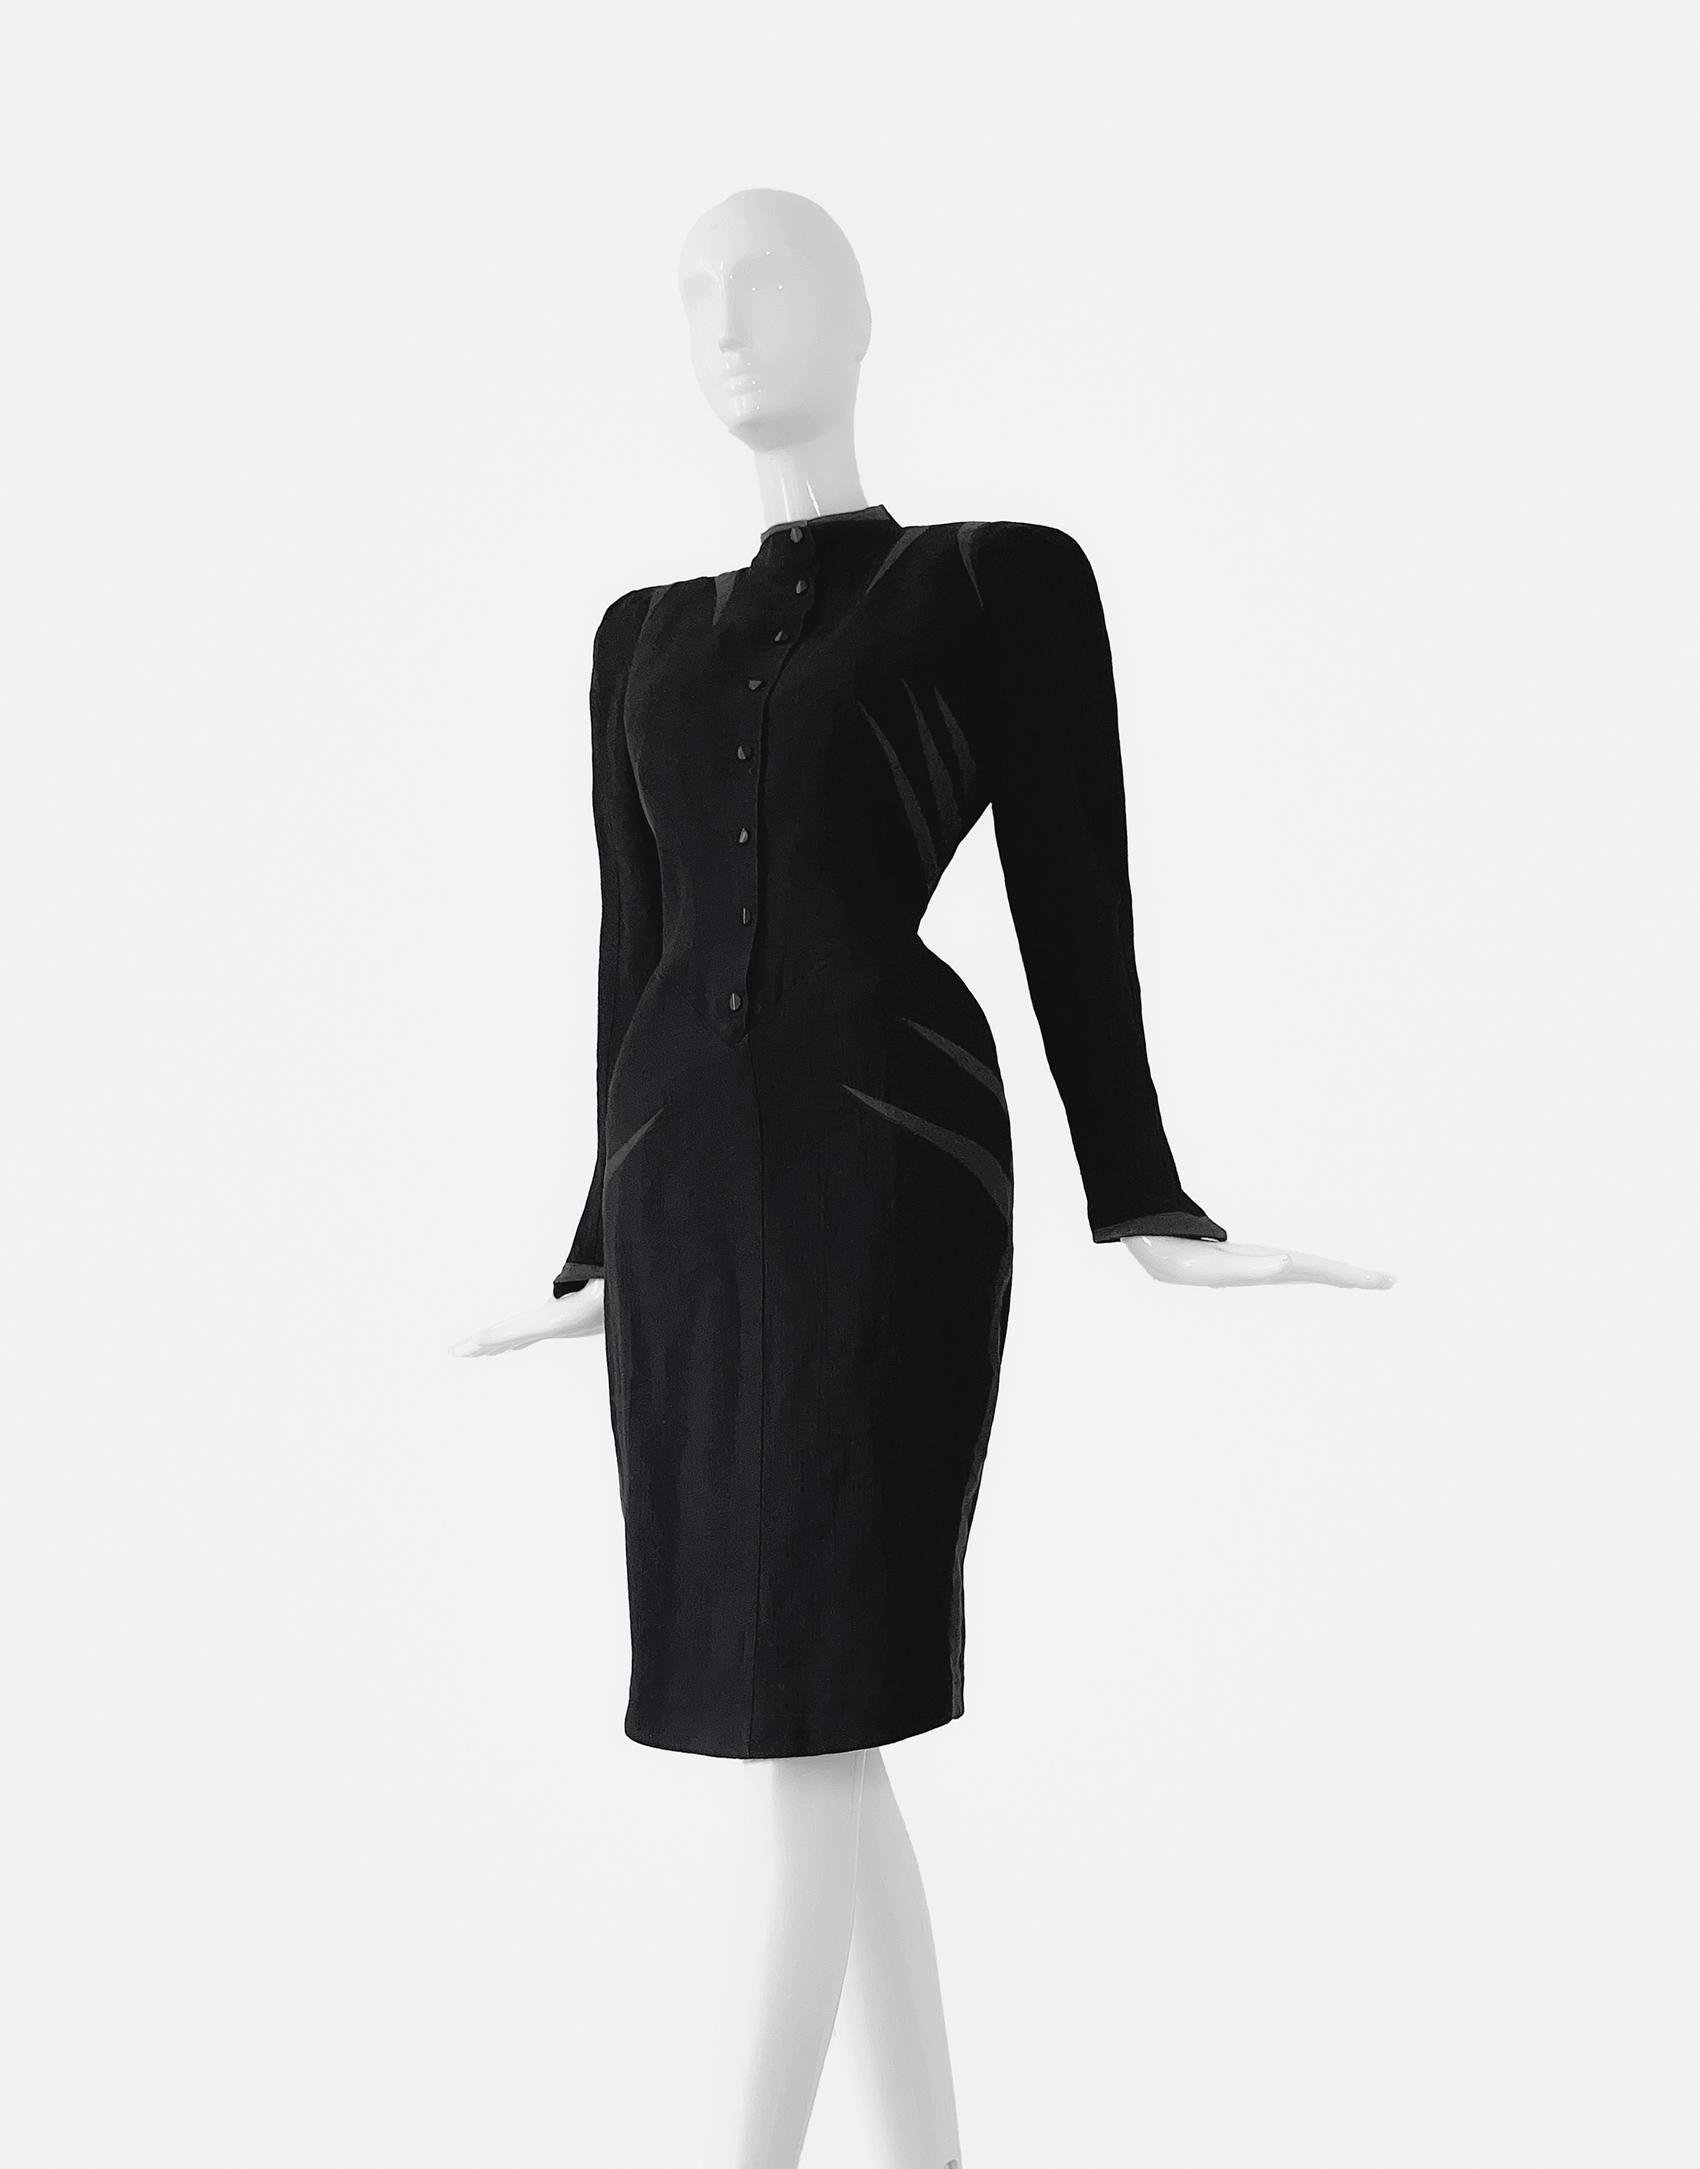 Rare Thierry Mugler SS 1988 Dress Black Iconic Dramatic Collectors Piece  For Sale 5